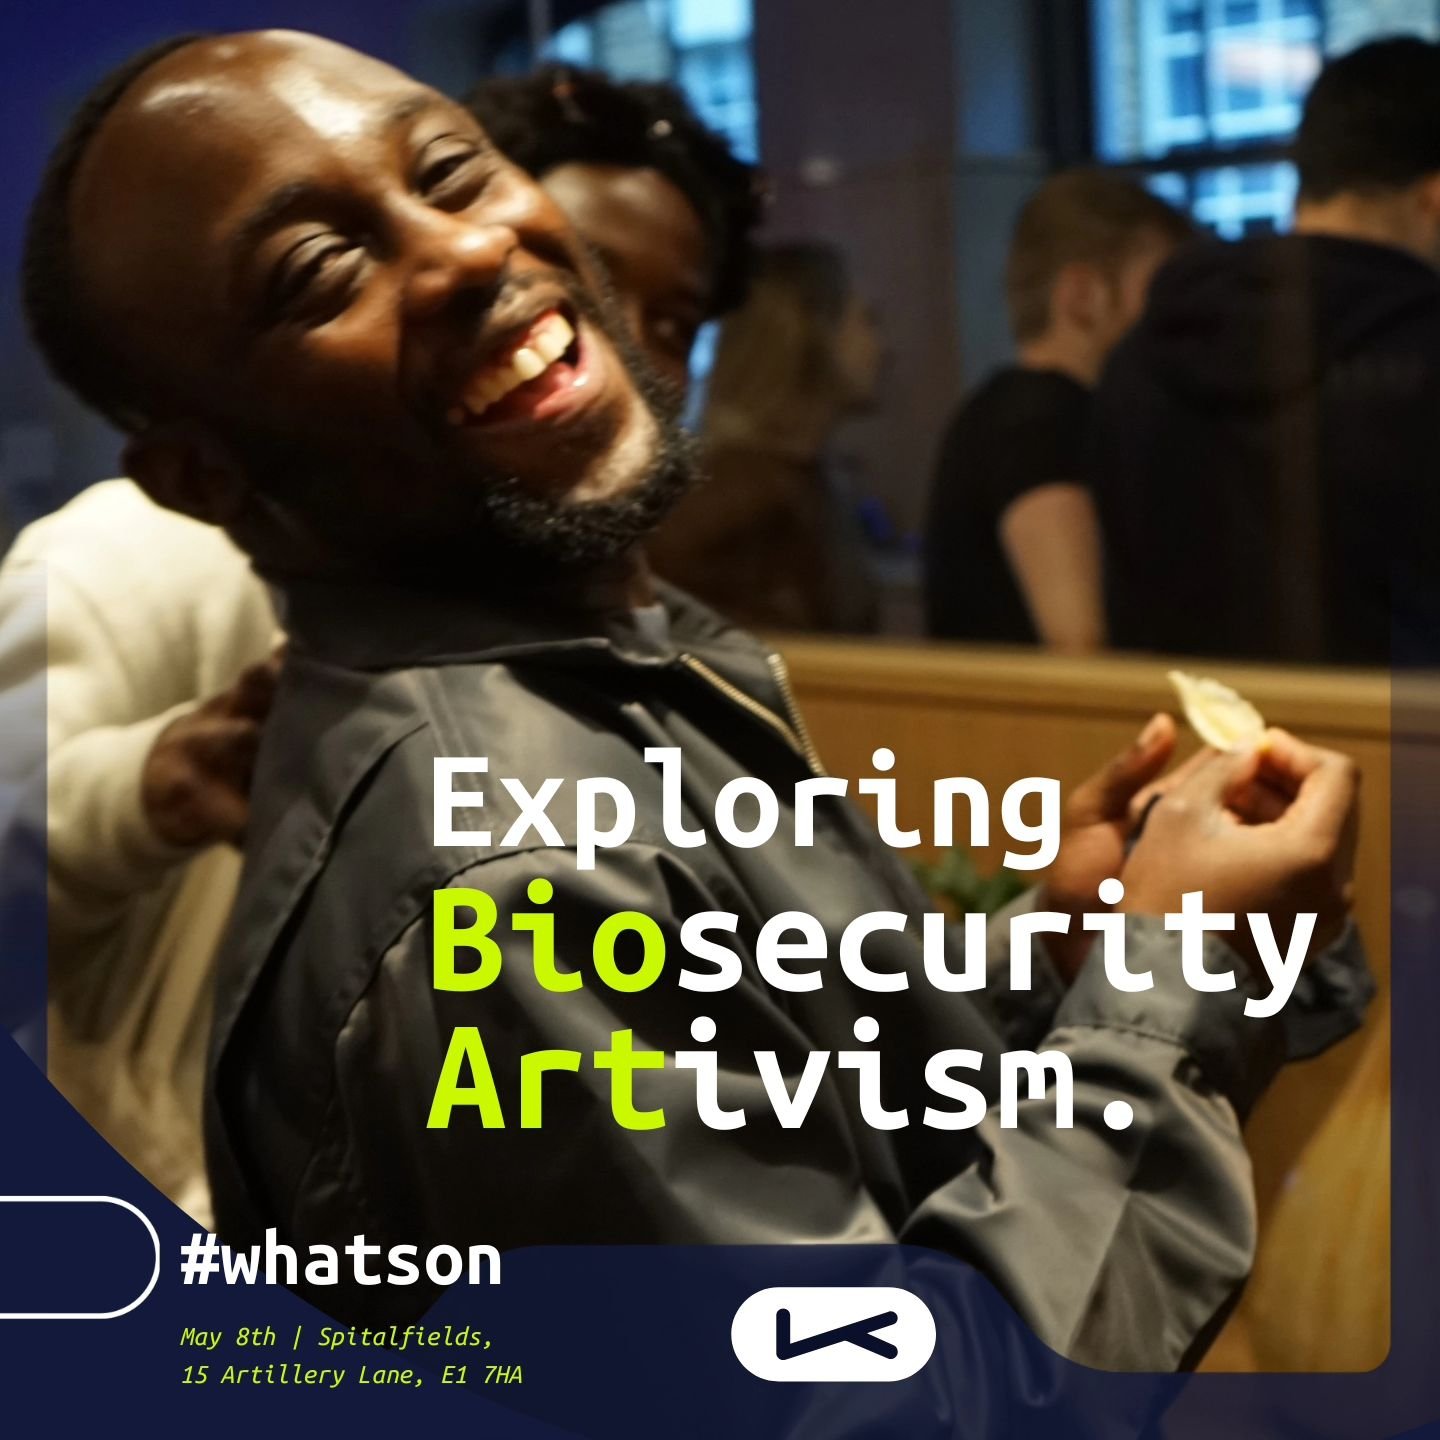 🌿 Join us for an electrifying Biosecurity Artivism workshop with the BADU community in collaboration with UCL Institute of Education! 🎨✨

📅 Date: March 19th
🕠 Time: 5:30pm - 7:30pm
📍 Venue: 15 Artillery Ln, London E1 7HA

🌟 Audience age groups: